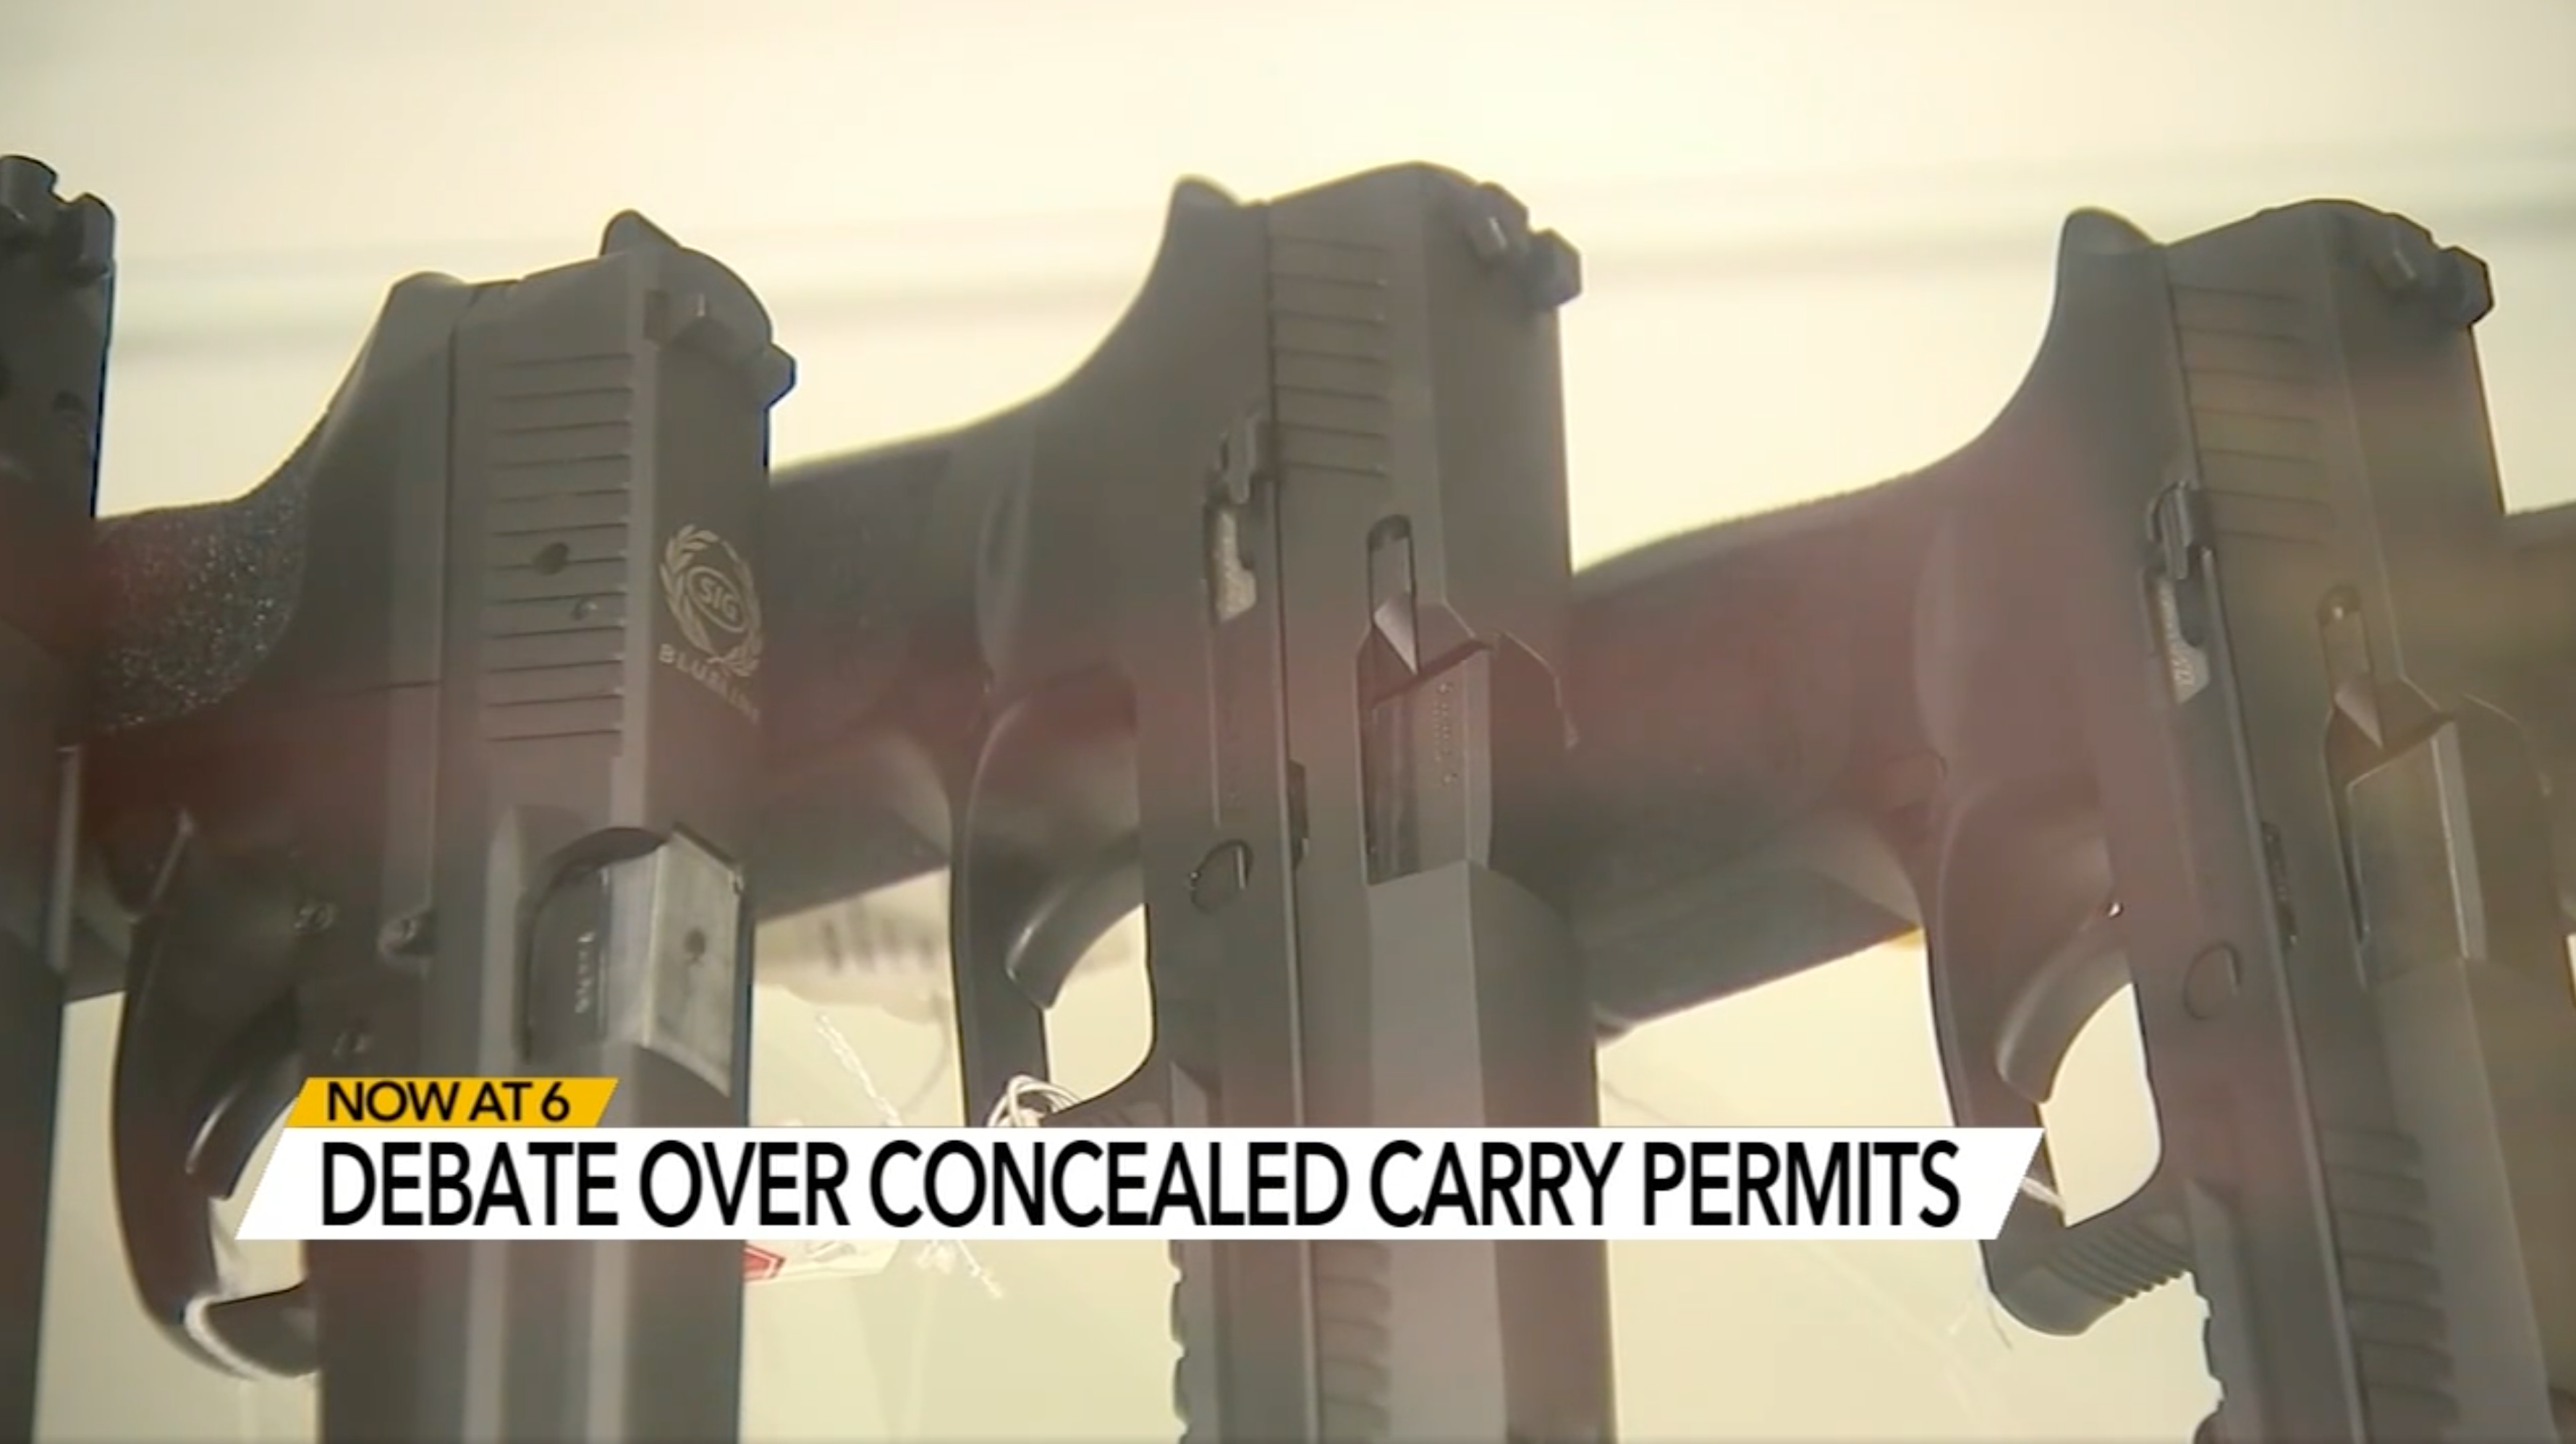 Concealed carry permit bill advances in NC House committee